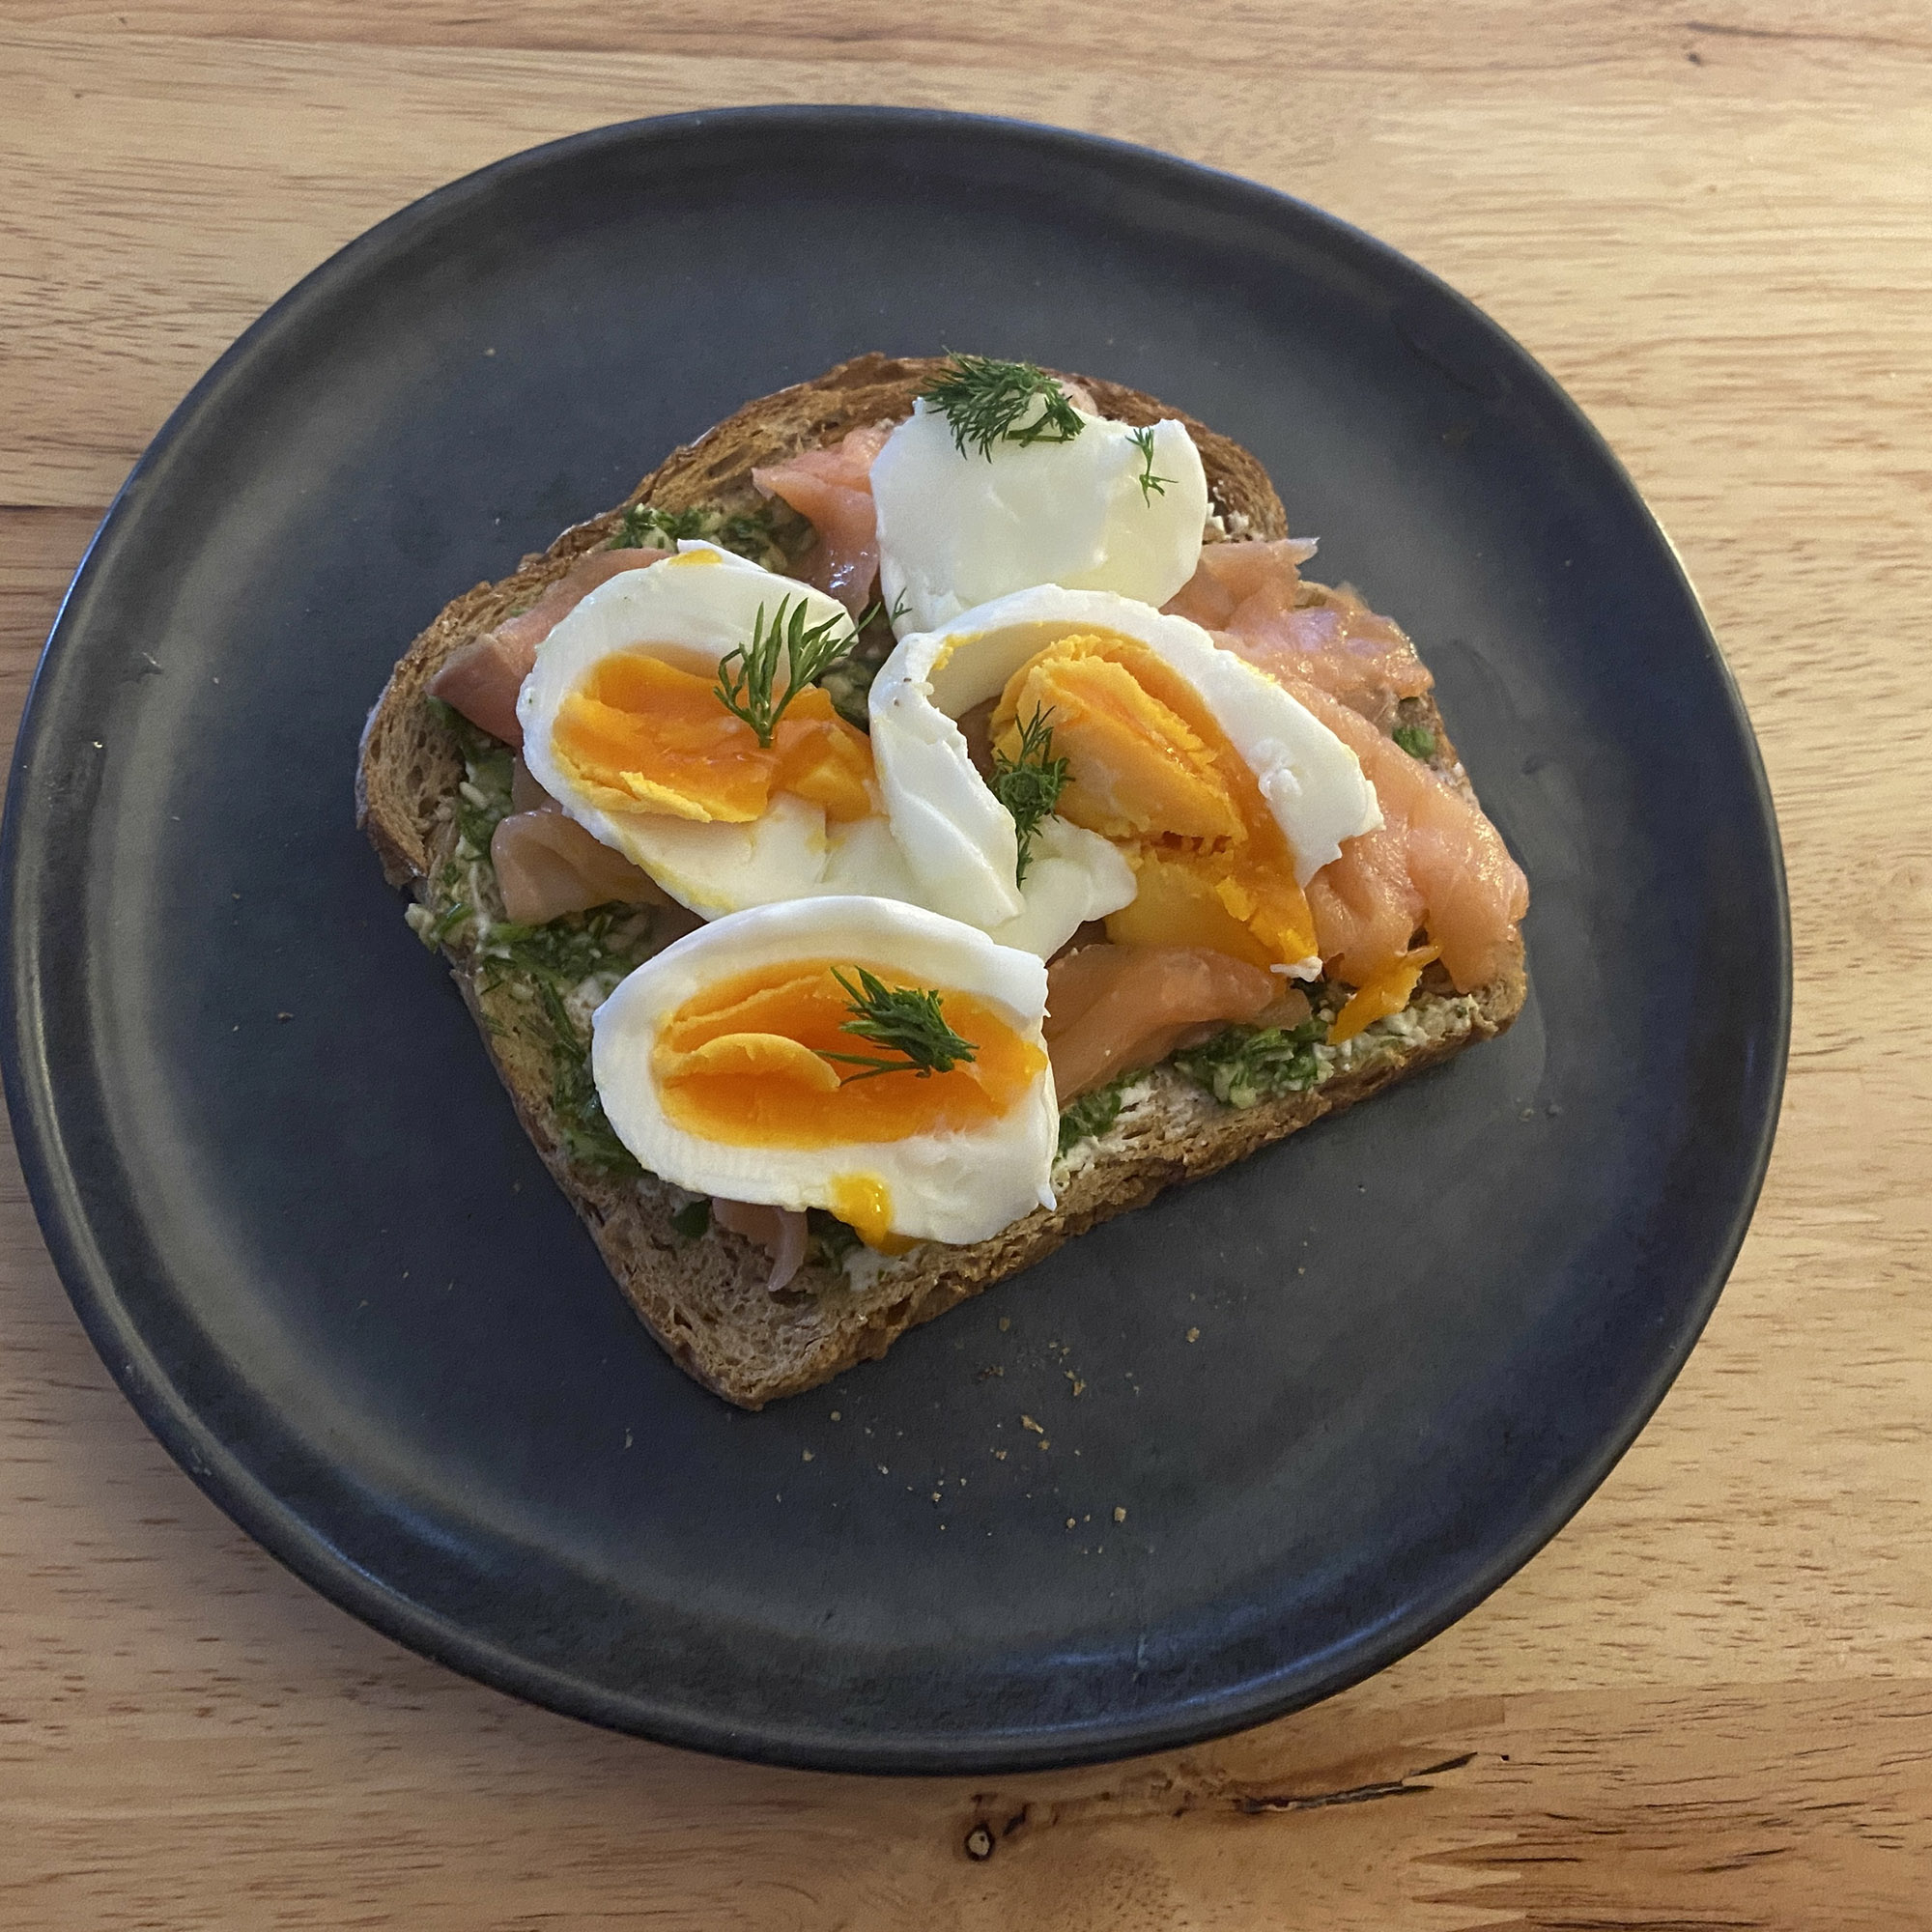 pesto toast recipe - piece of toast with salmon, goat's cheese, pesto and dill - to highlight the high protein breakfast benefits